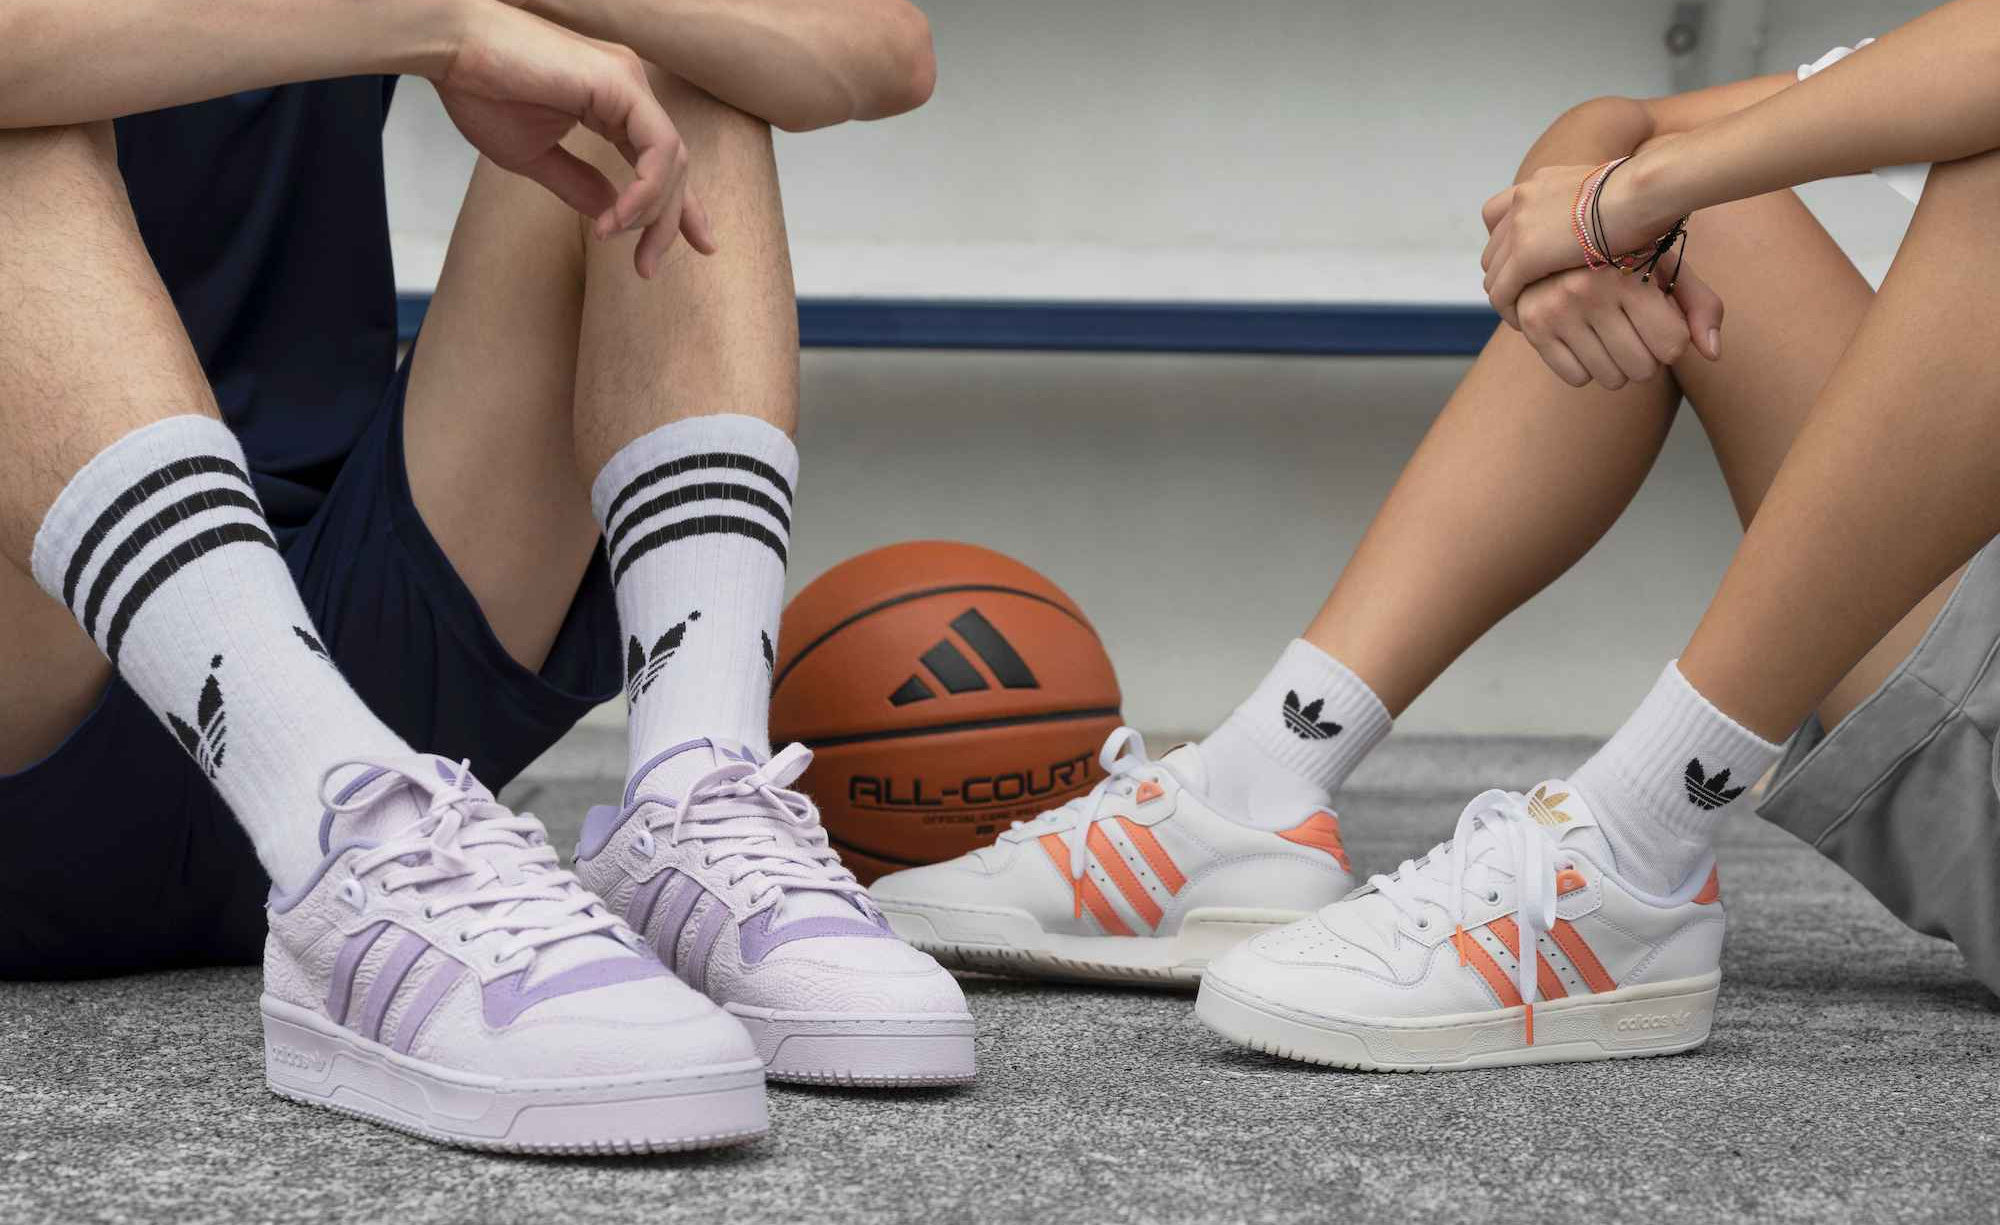 Adidas Rivalry Shoes Media Feature